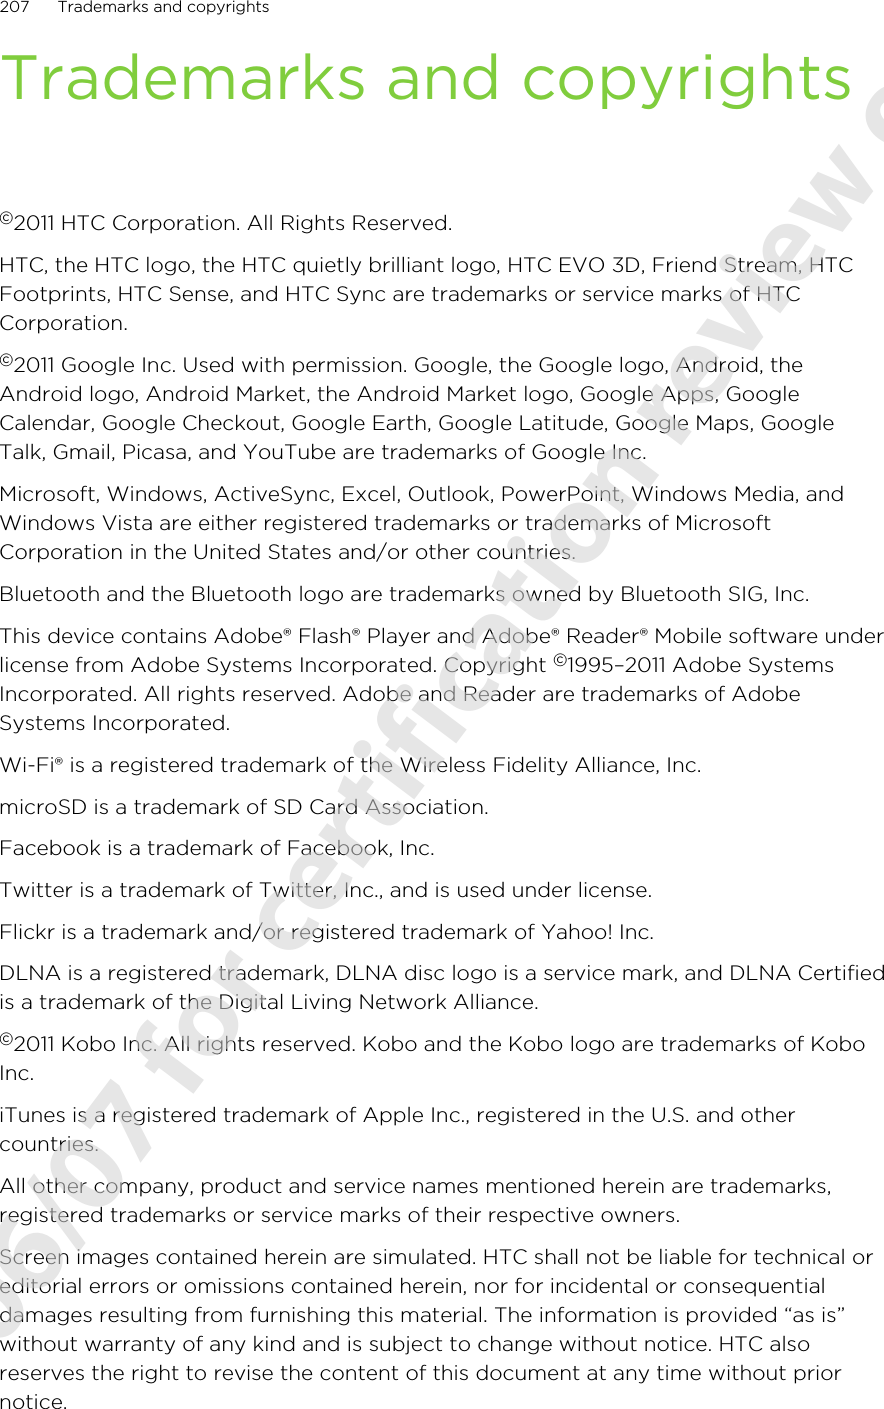 Trademarks and copyrights©2011 HTC Corporation. All Rights Reserved.HTC, the HTC logo, the HTC quietly brilliant logo, HTC EVO 3D, Friend Stream, HTCFootprints, HTC Sense, and HTC Sync are trademarks or service marks of HTCCorporation.©2011 Google Inc. Used with permission. Google, the Google logo, Android, theAndroid logo, Android Market, the Android Market logo, Google Apps, GoogleCalendar, Google Checkout, Google Earth, Google Latitude, Google Maps, GoogleTalk, Gmail, Picasa, and YouTube are trademarks of Google Inc.Microsoft, Windows, ActiveSync, Excel, Outlook, PowerPoint, Windows Media, andWindows Vista are either registered trademarks or trademarks of MicrosoftCorporation in the United States and/or other countries.Bluetooth and the Bluetooth logo are trademarks owned by Bluetooth SIG, Inc.This device contains Adobe® Flash® Player and Adobe® Reader® Mobile software underlicense from Adobe Systems Incorporated. Copyright ©1995–2011 Adobe SystemsIncorporated. All rights reserved. Adobe and Reader are trademarks of AdobeSystems Incorporated.Wi-Fi® is a registered trademark of the Wireless Fidelity Alliance, Inc.microSD is a trademark of SD Card Association.Facebook is a trademark of Facebook, Inc.Twitter is a trademark of Twitter, Inc., and is used under license.Flickr is a trademark and/or registered trademark of Yahoo! Inc.DLNA is a registered trademark, DLNA disc logo is a service mark, and DLNA Certifiedis a trademark of the Digital Living Network Alliance.©2011 Kobo Inc. All rights reserved. Kobo and the Kobo logo are trademarks of KoboInc.iTunes is a registered trademark of Apple Inc., registered in the U.S. and othercountries.All other company, product and service names mentioned herein are trademarks,registered trademarks or service marks of their respective owners.Screen images contained herein are simulated. HTC shall not be liable for technical oreditorial errors or omissions contained herein, nor for incidental or consequentialdamages resulting from furnishing this material. The information is provided “as is”without warranty of any kind and is subject to change without notice. HTC alsoreserves the right to revise the content of this document at any time without priornotice.207 Trademarks and copyrights2011/06/07 for certification review only